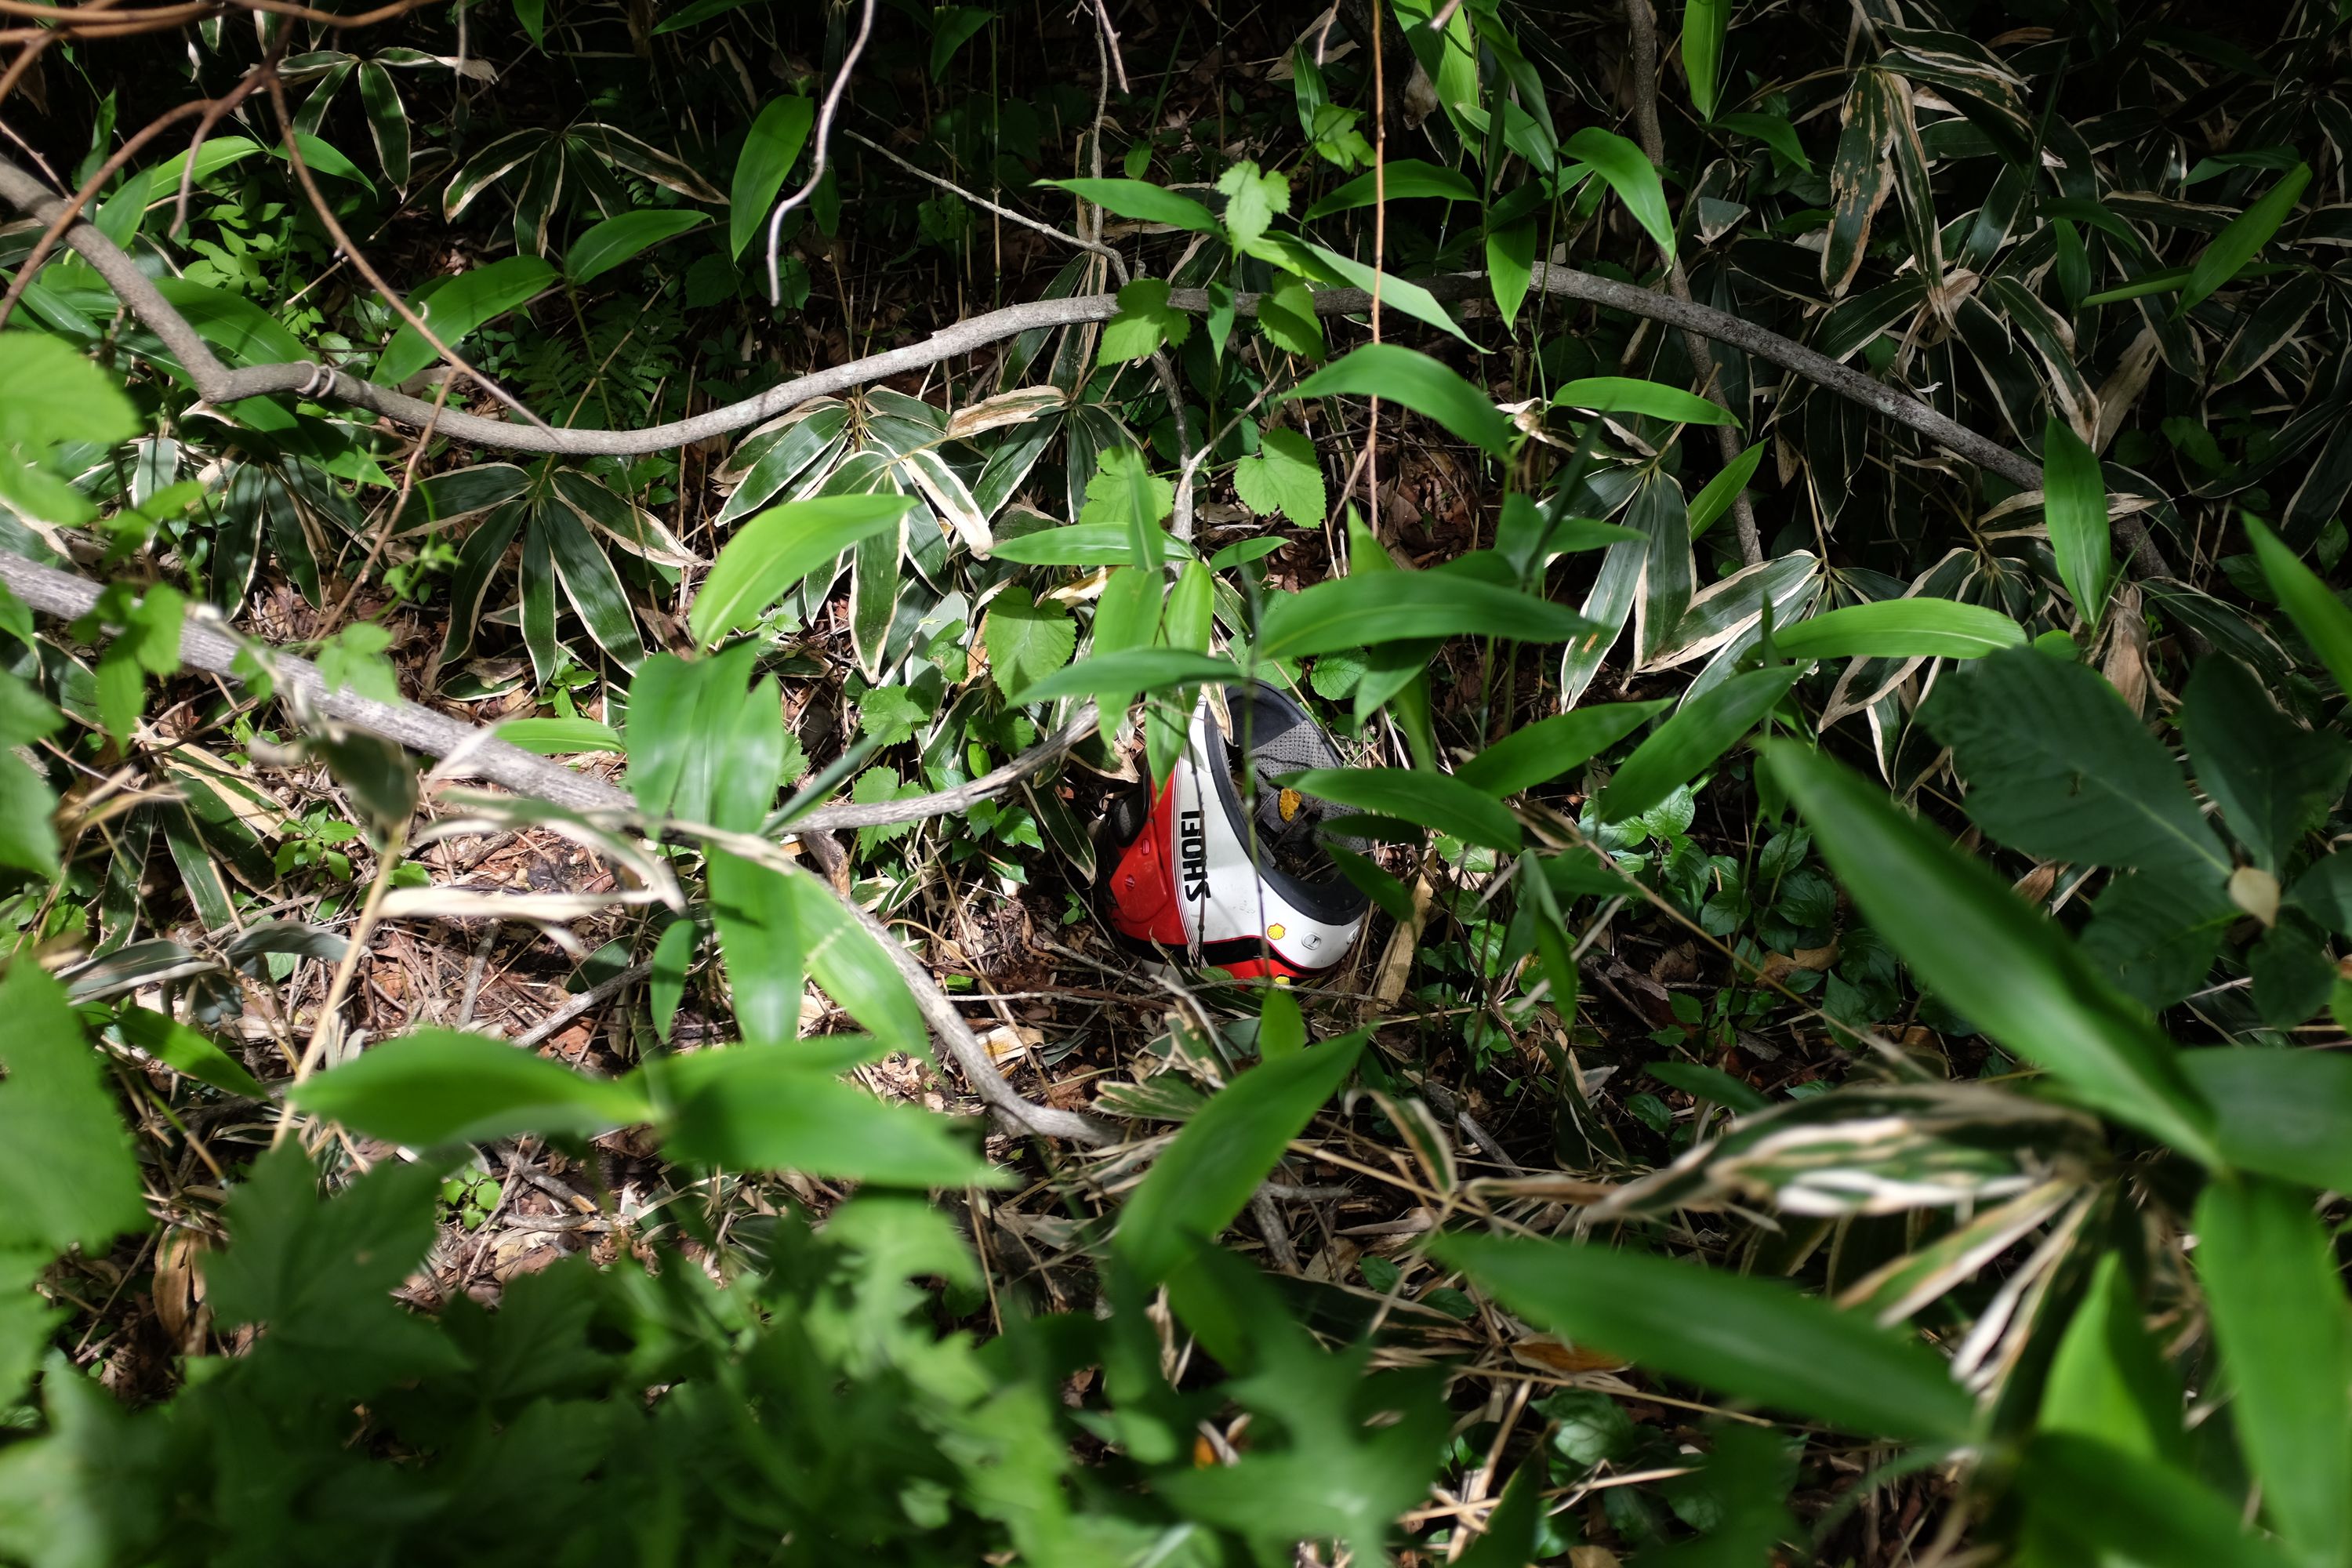 A motorcycle helmet in the undergrowth.